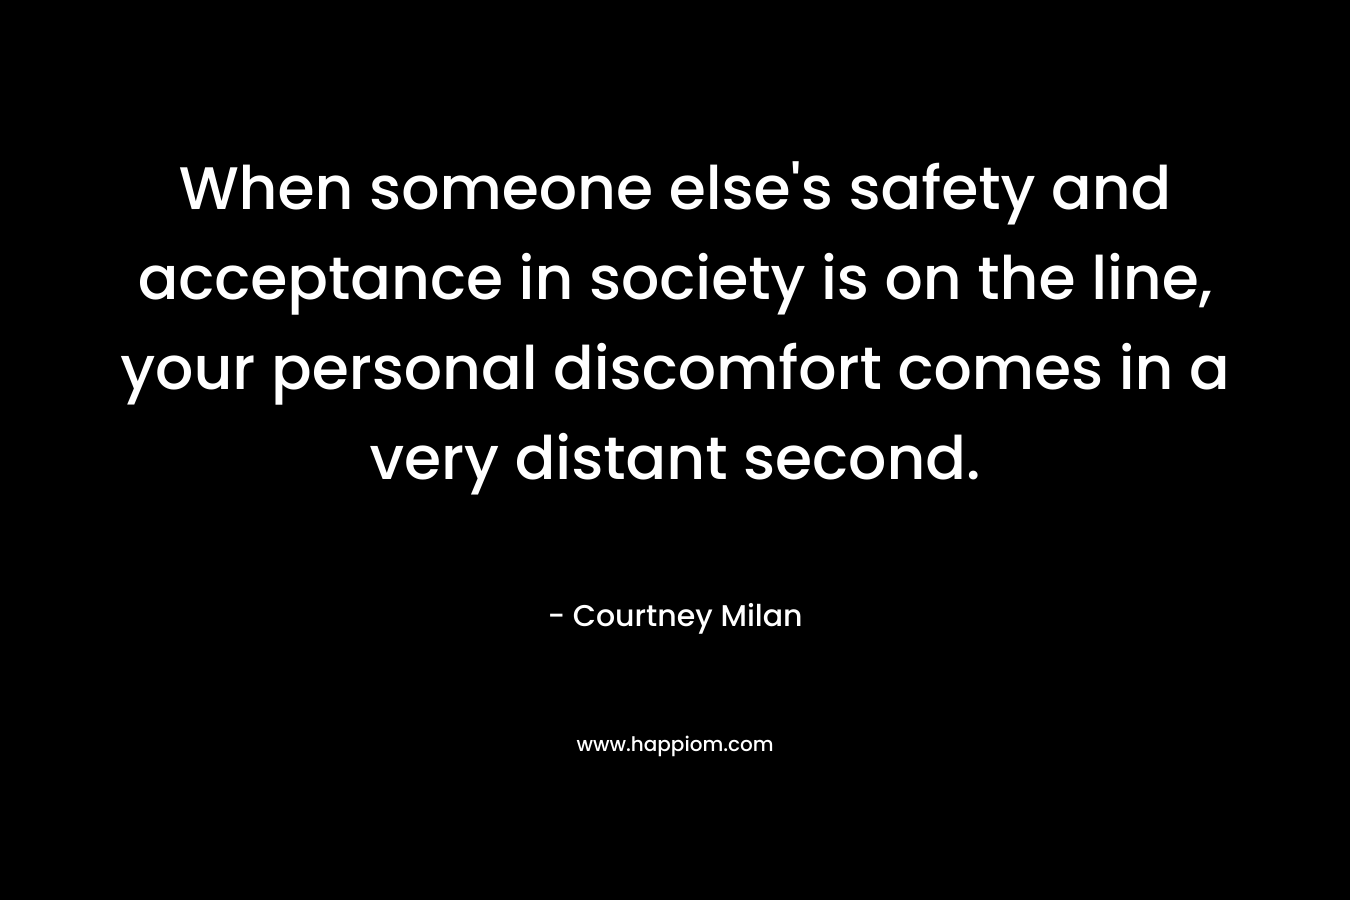 When someone else's safety and acceptance in society is on the line, your personal discomfort comes in a very distant second.